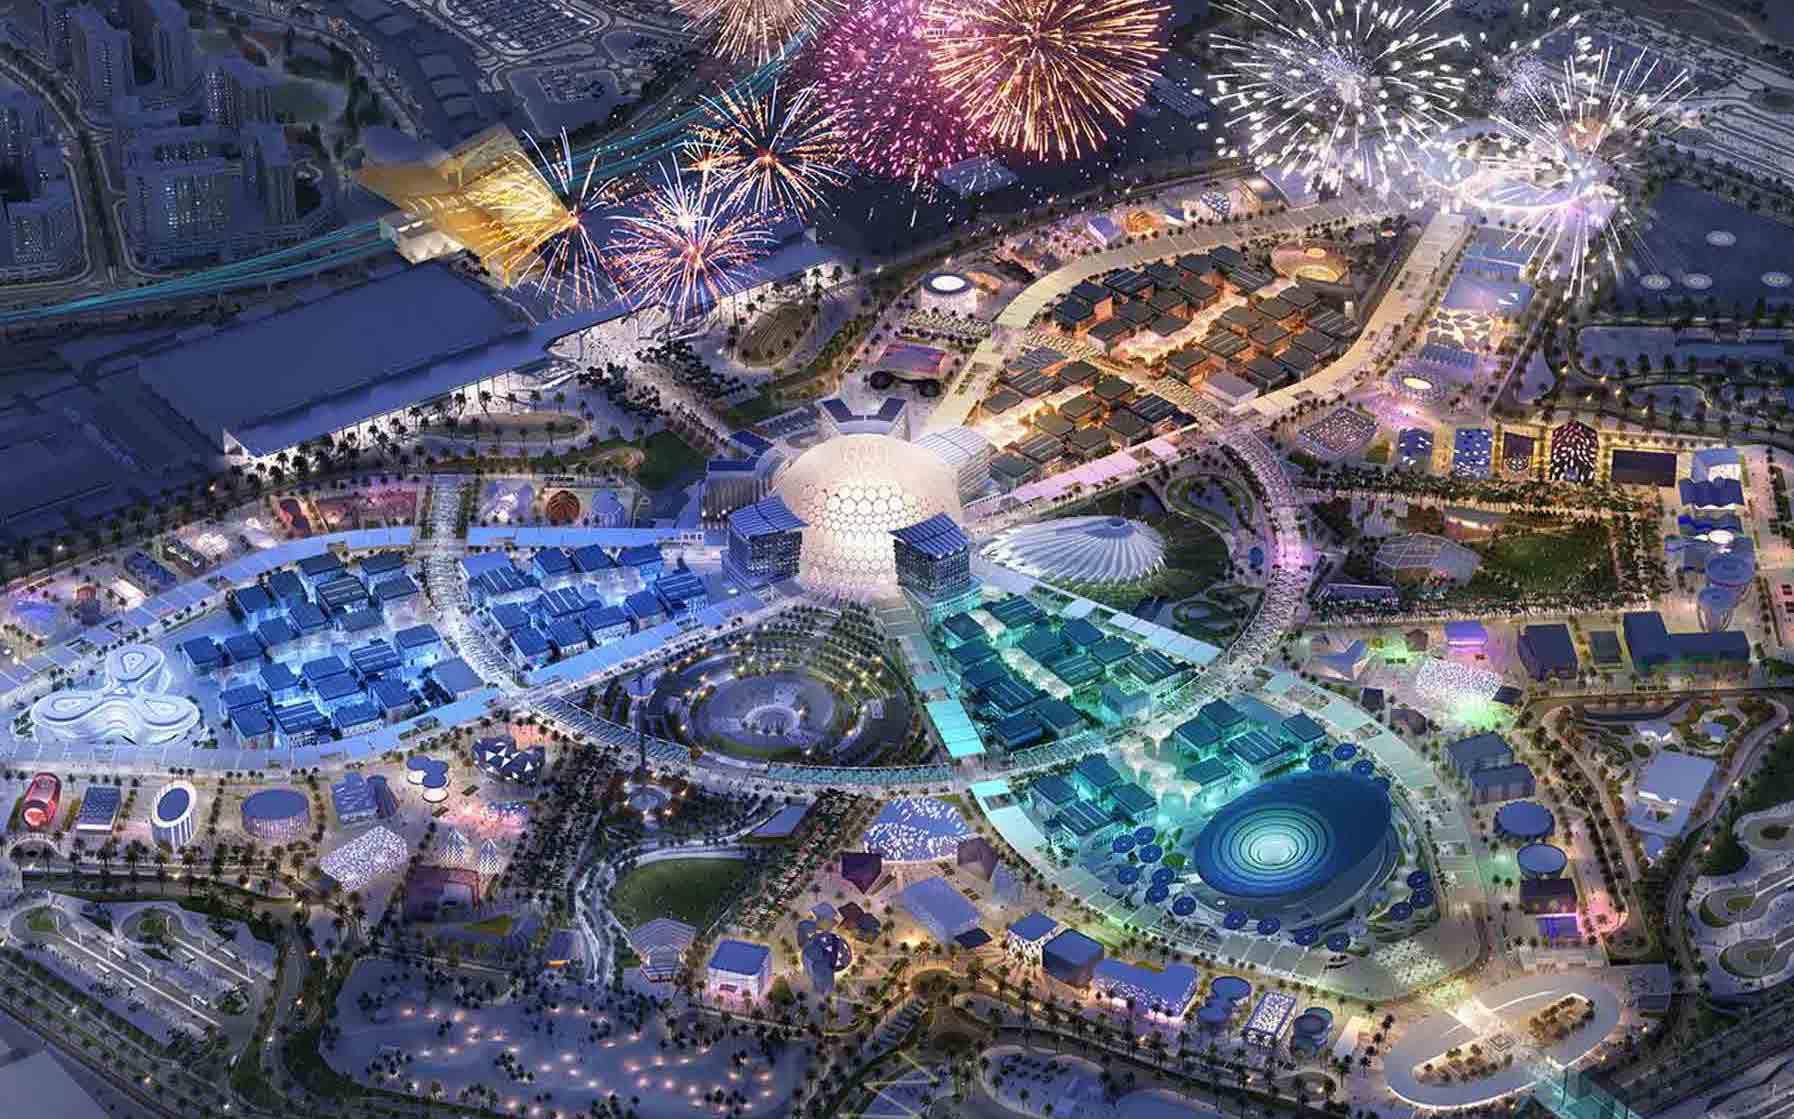 Expo 2020 Dubai: Ticket prices, free tickets and discounts announced - News  WWC